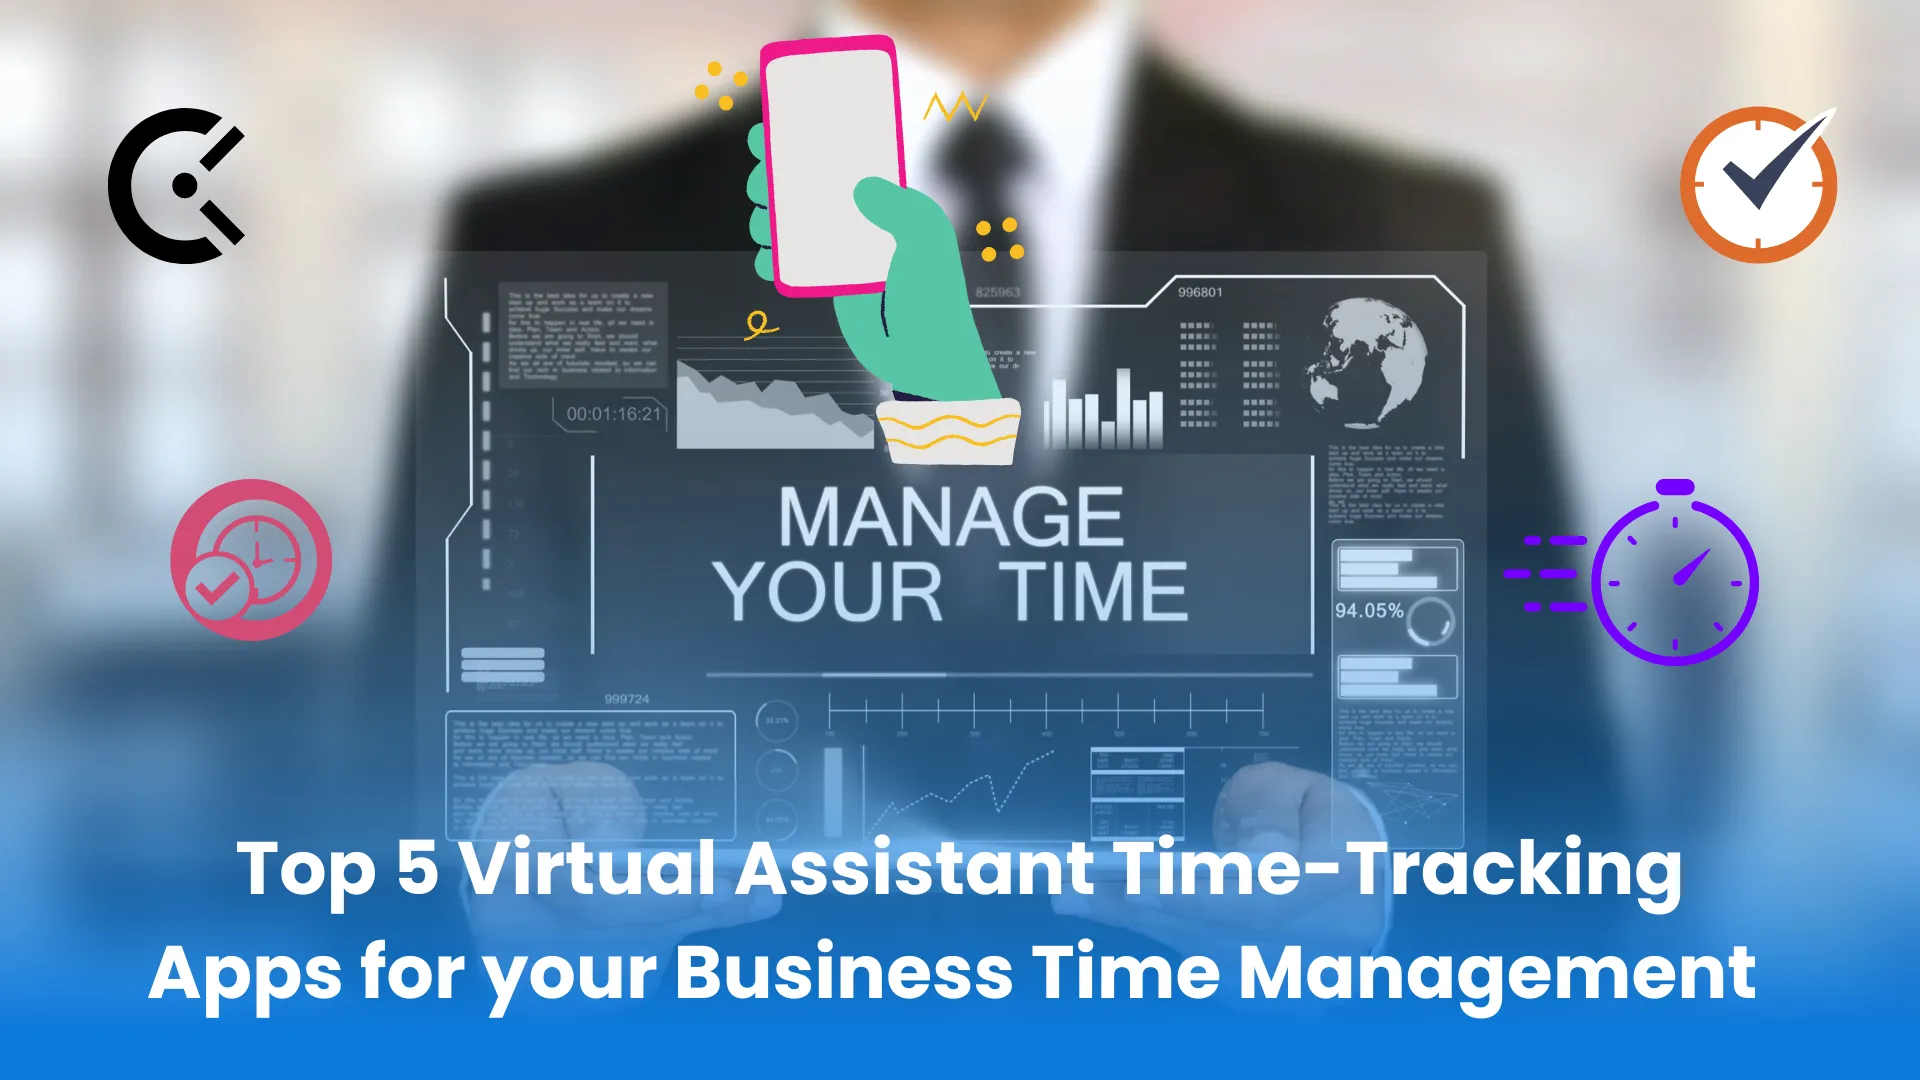 Top 5 virtual assistant time-tracking apps for efficient business time management.